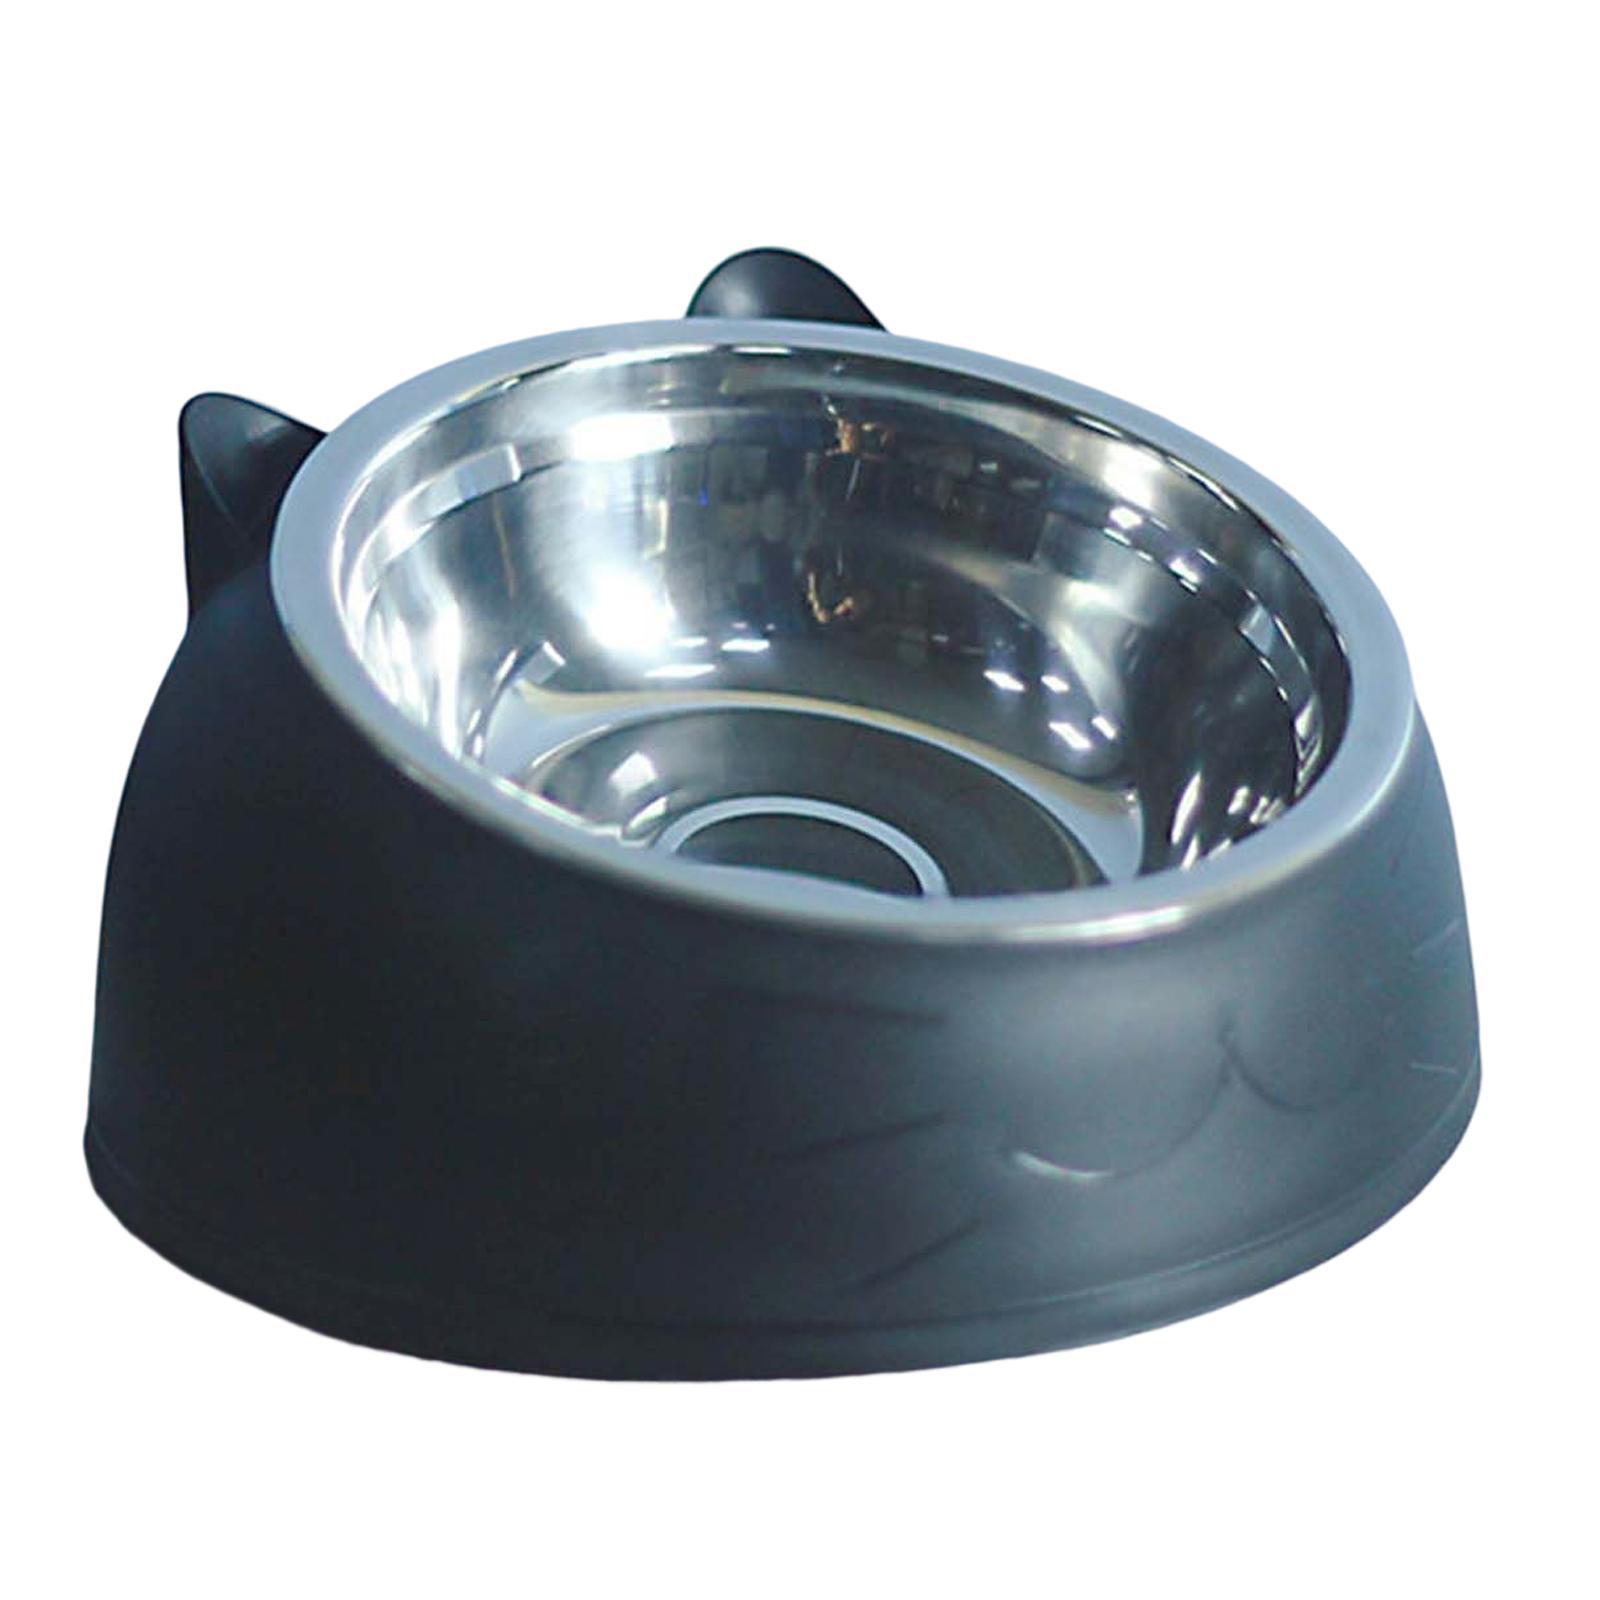 Cat Dog Bowl Raised Tilted Elevated Non Slip Pet Container for Dog